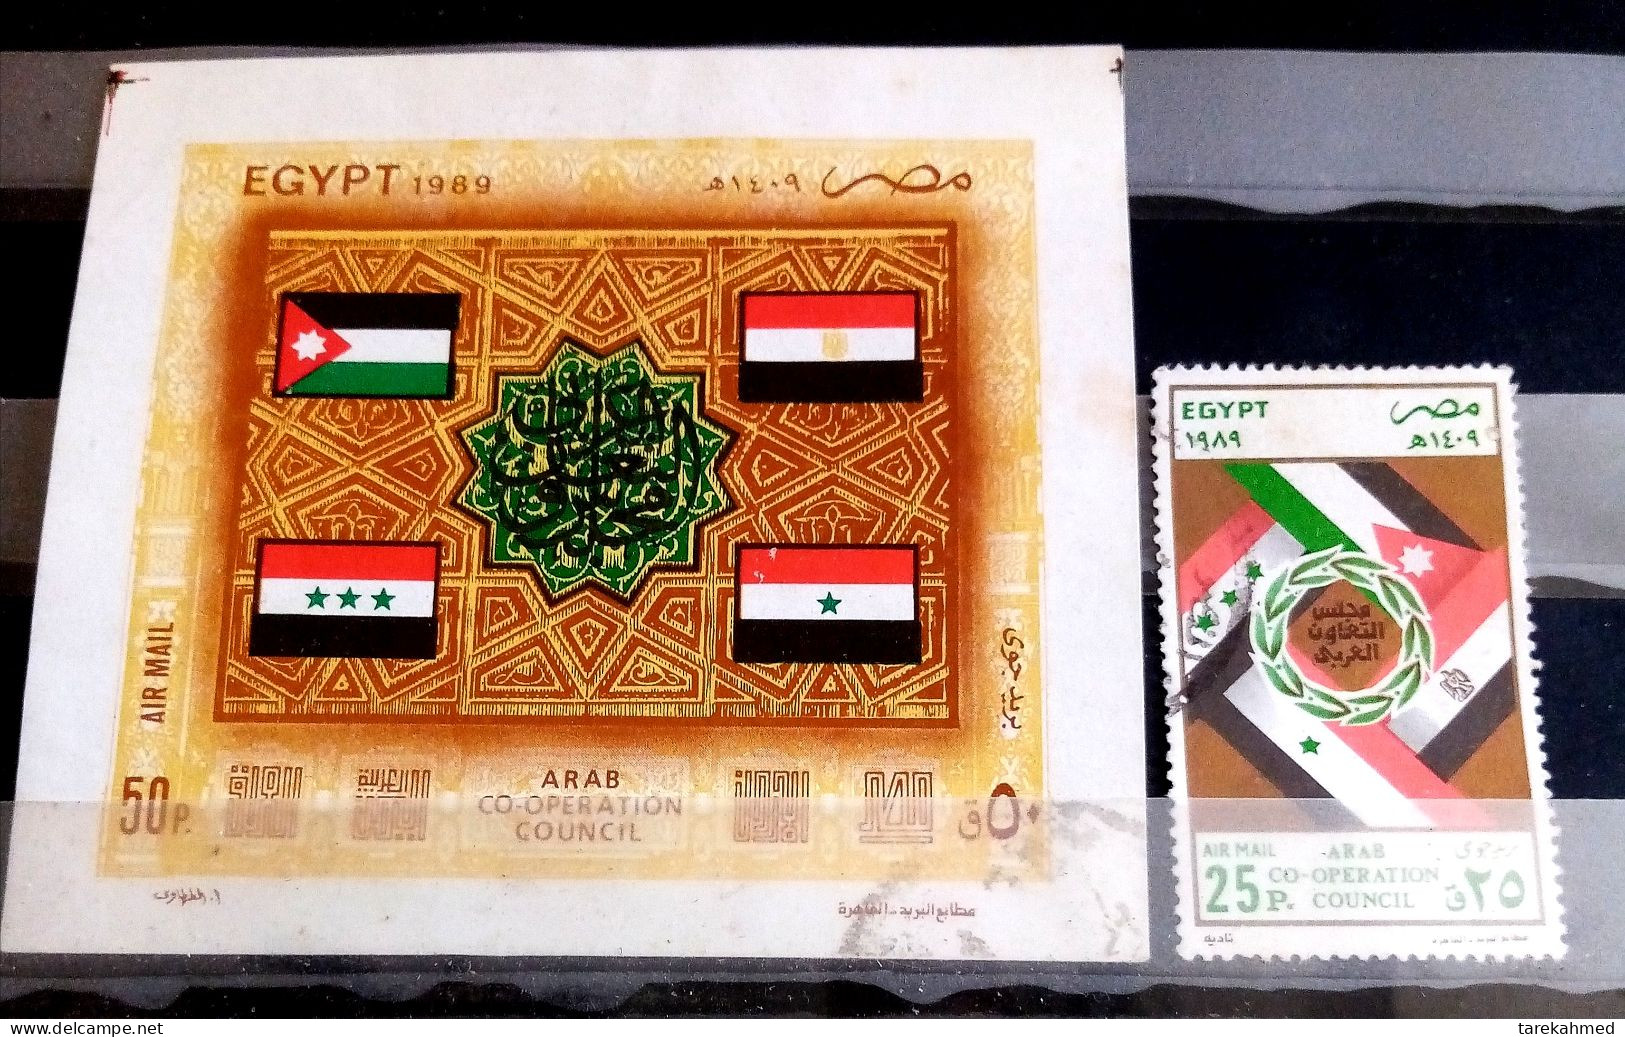 EGYPT 1989 , Complete SET, Stamp And S/S Of The ARAB CO-OPERATION COUNCIL, Flags, Airmail, MNH. - Nuevos